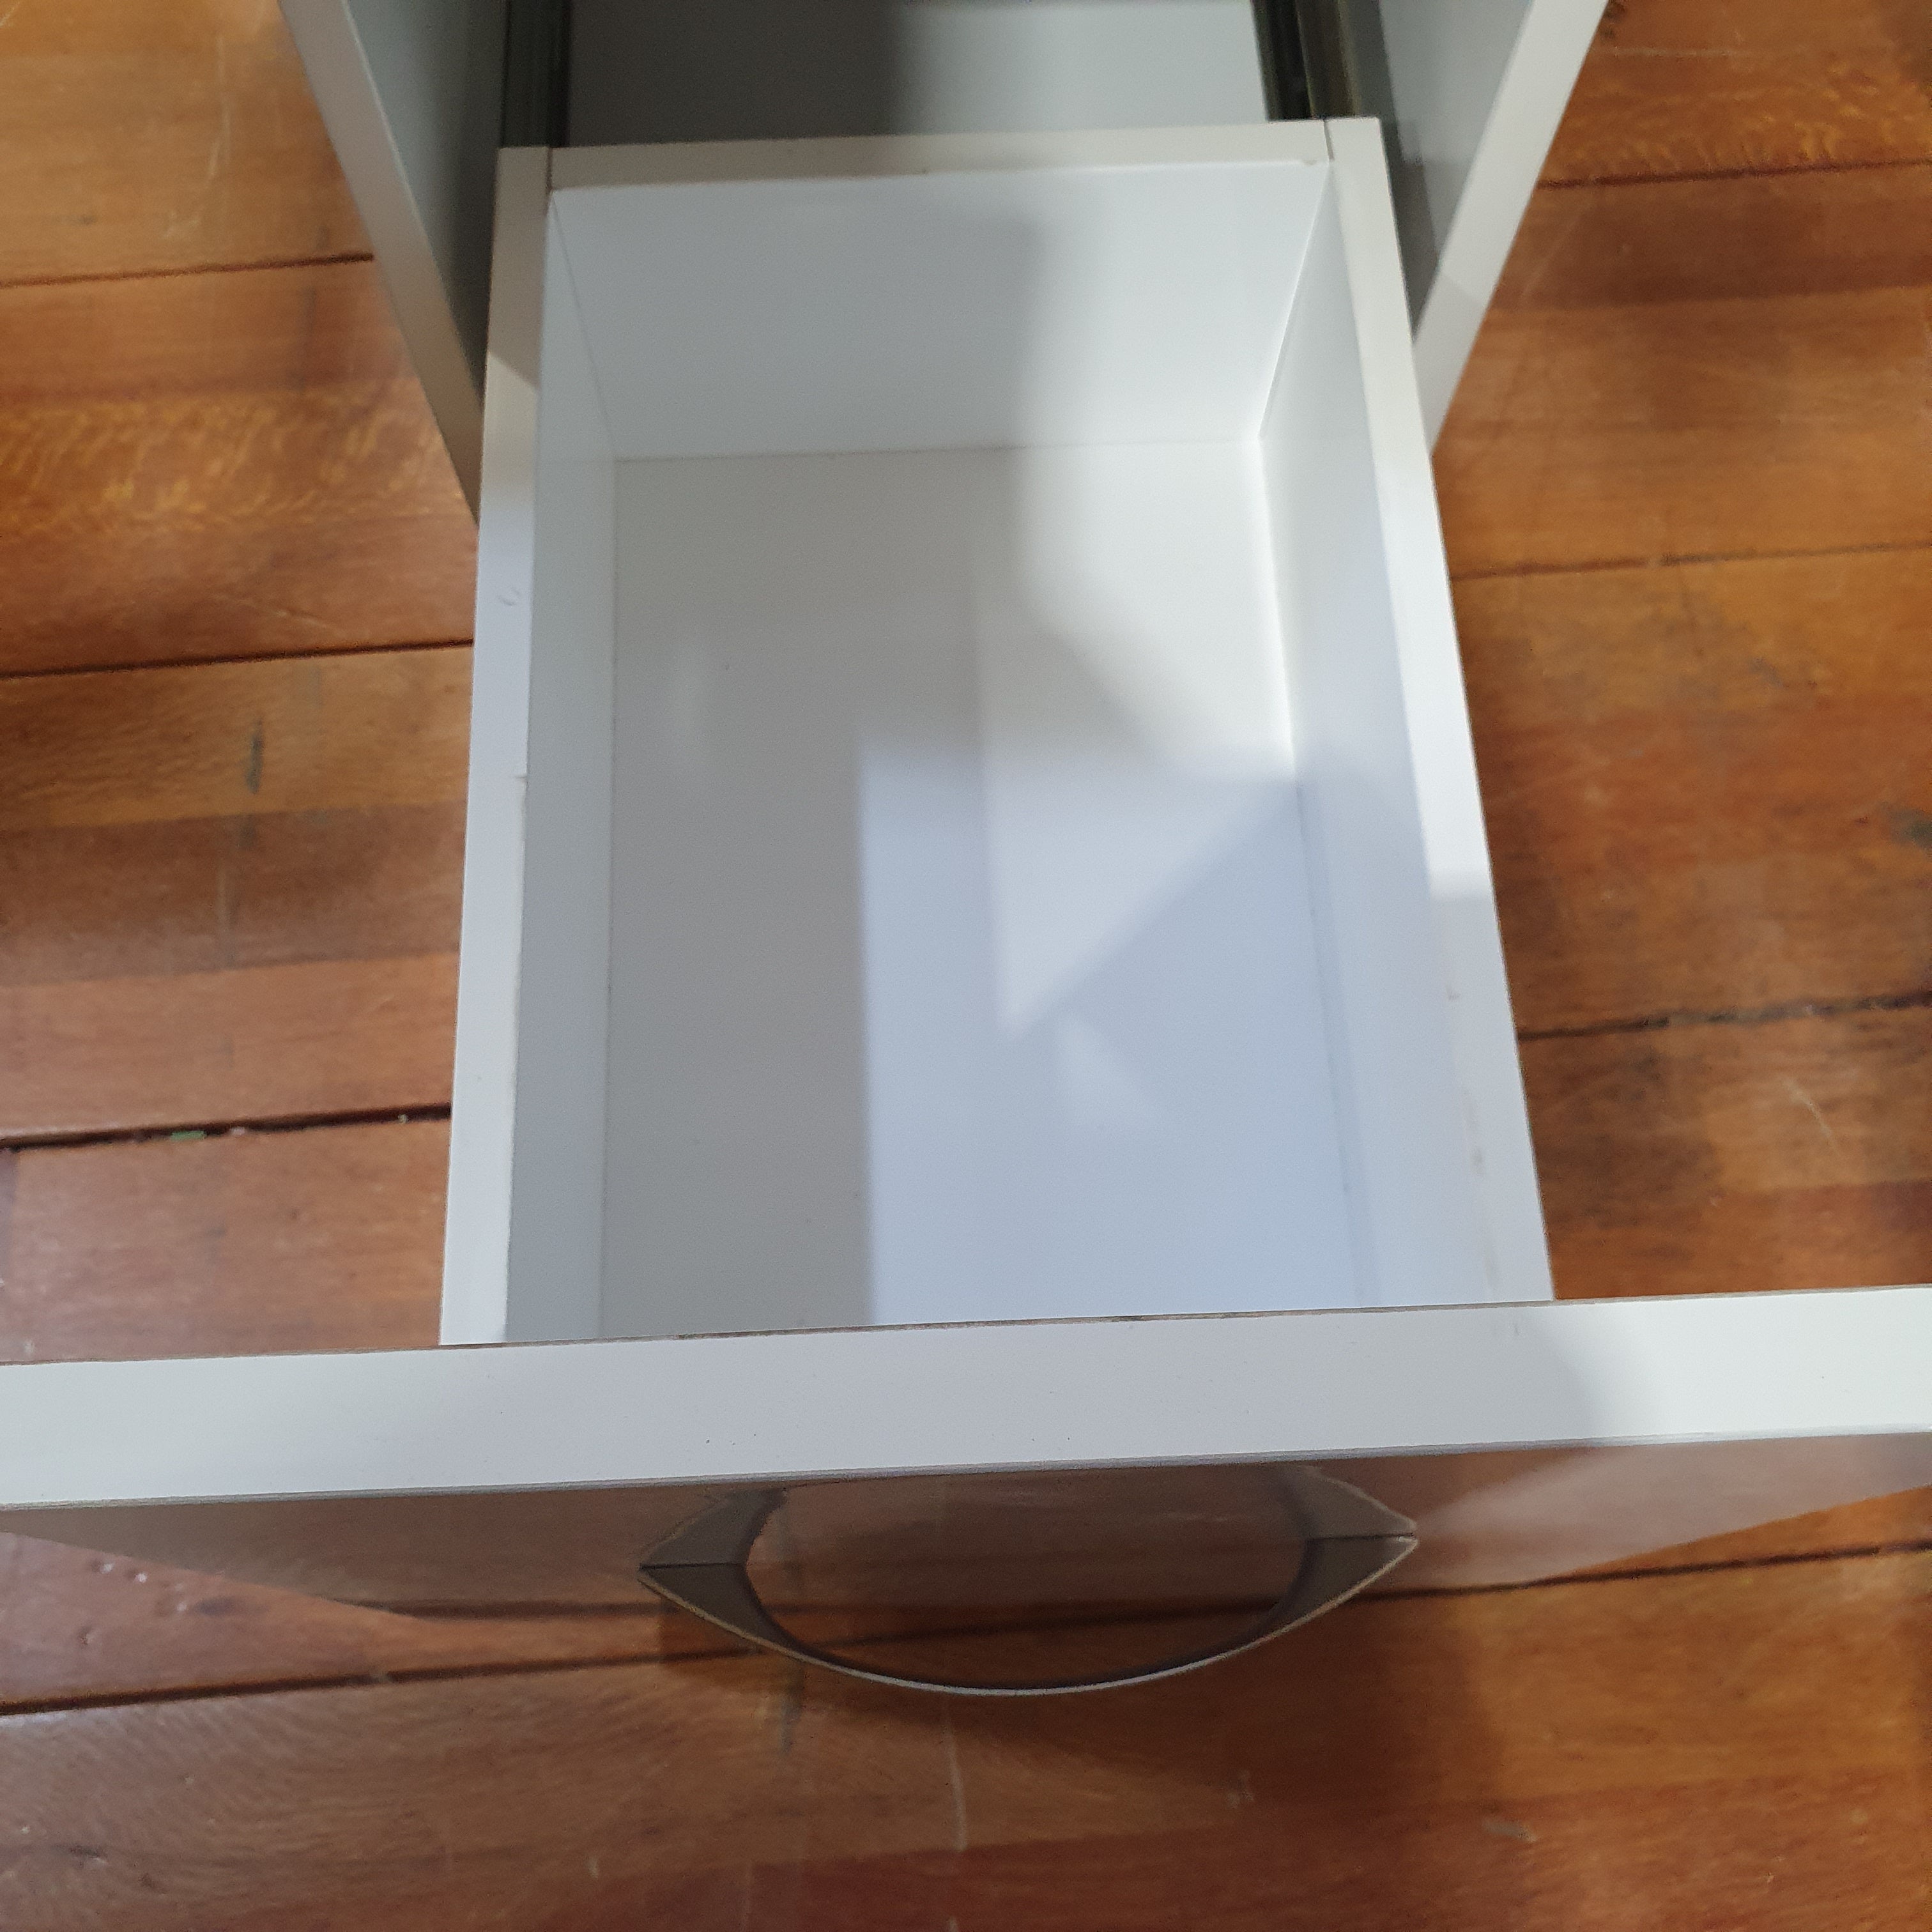 [STORE PICKUP ONLY] MANICURE TABLE MARBLE WHITE - NEW